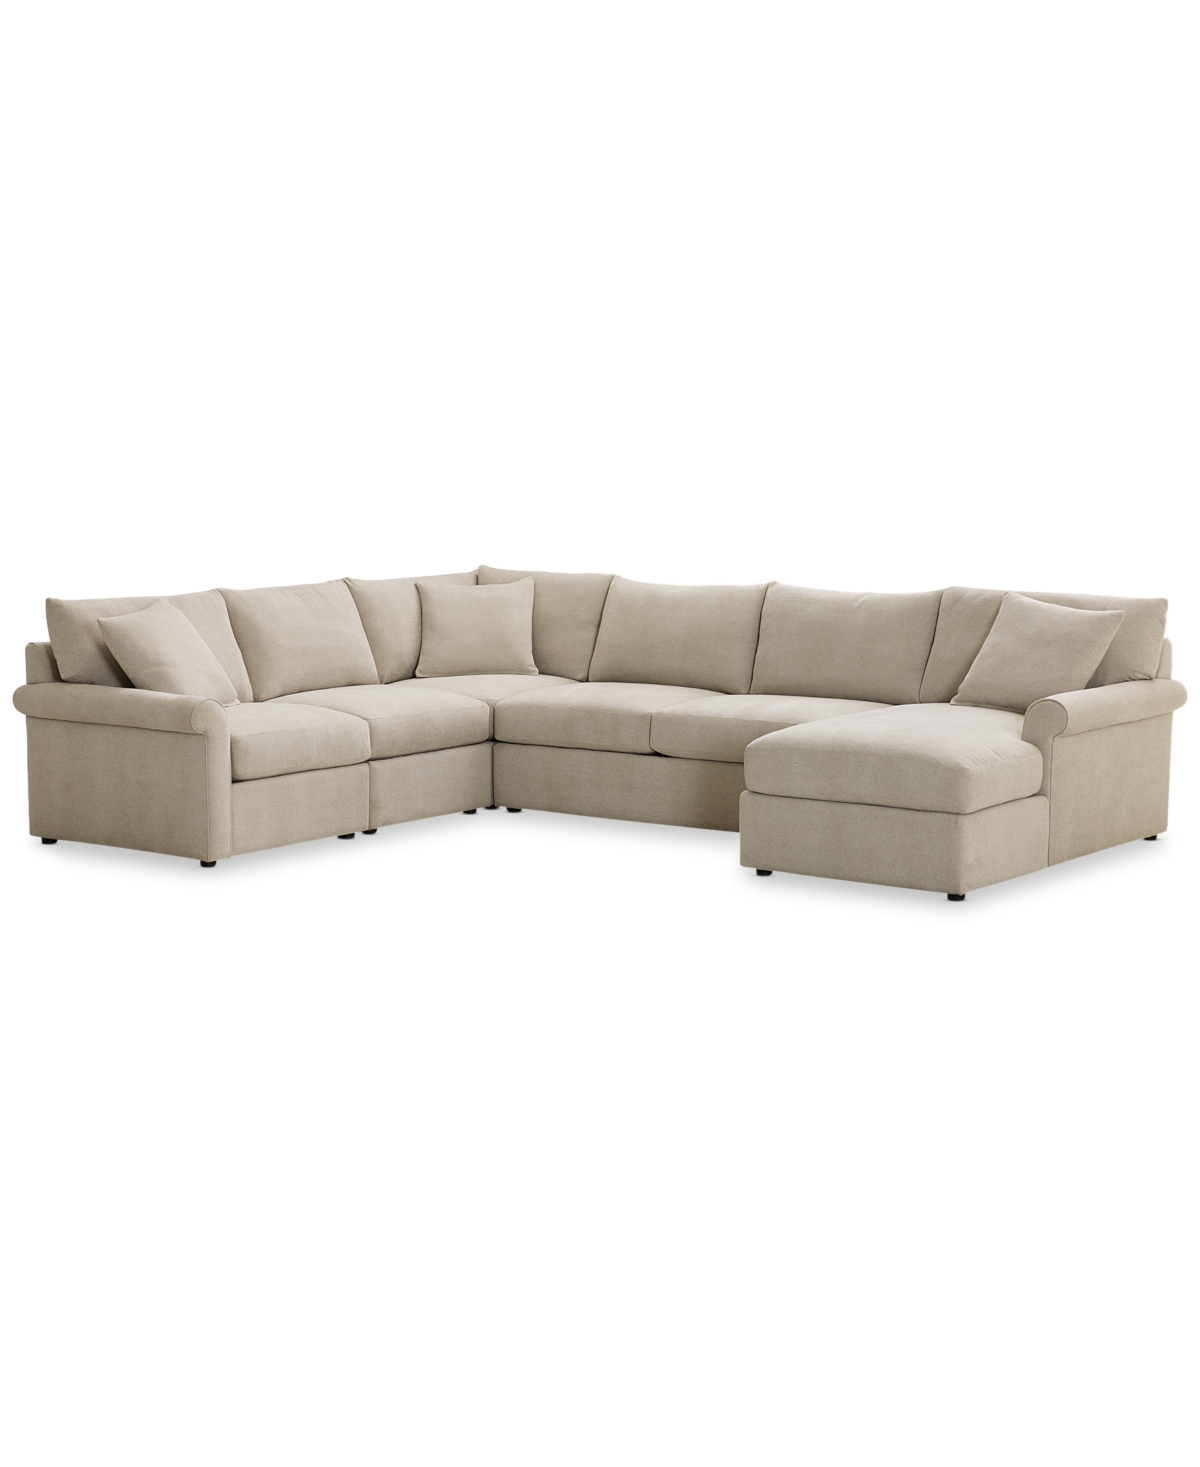 Furniture Wrenley 138" 5-pc. Fabric Modular Sleeper Chaise Sectional Sofa, Created For Macy's In Dove